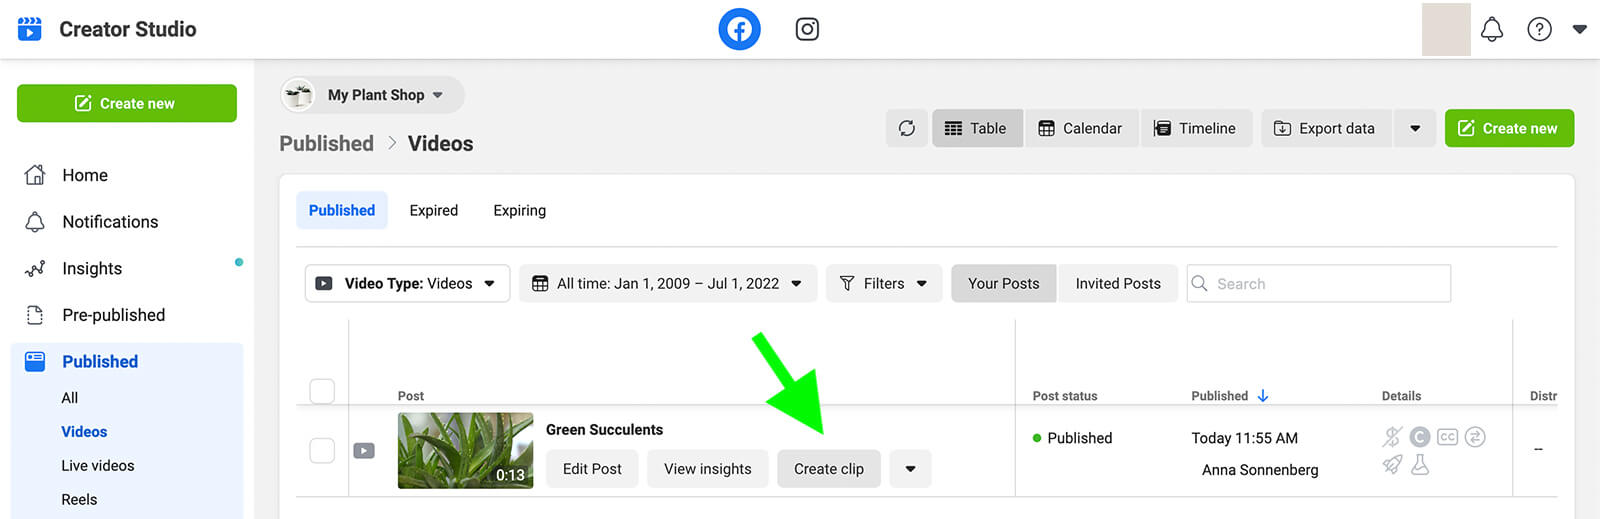 how-to-make-schedule-publish-facebook-reels-creator-studio-clip-existing-video-repurpose-tab-create-clip-my-plant-shop-step-8